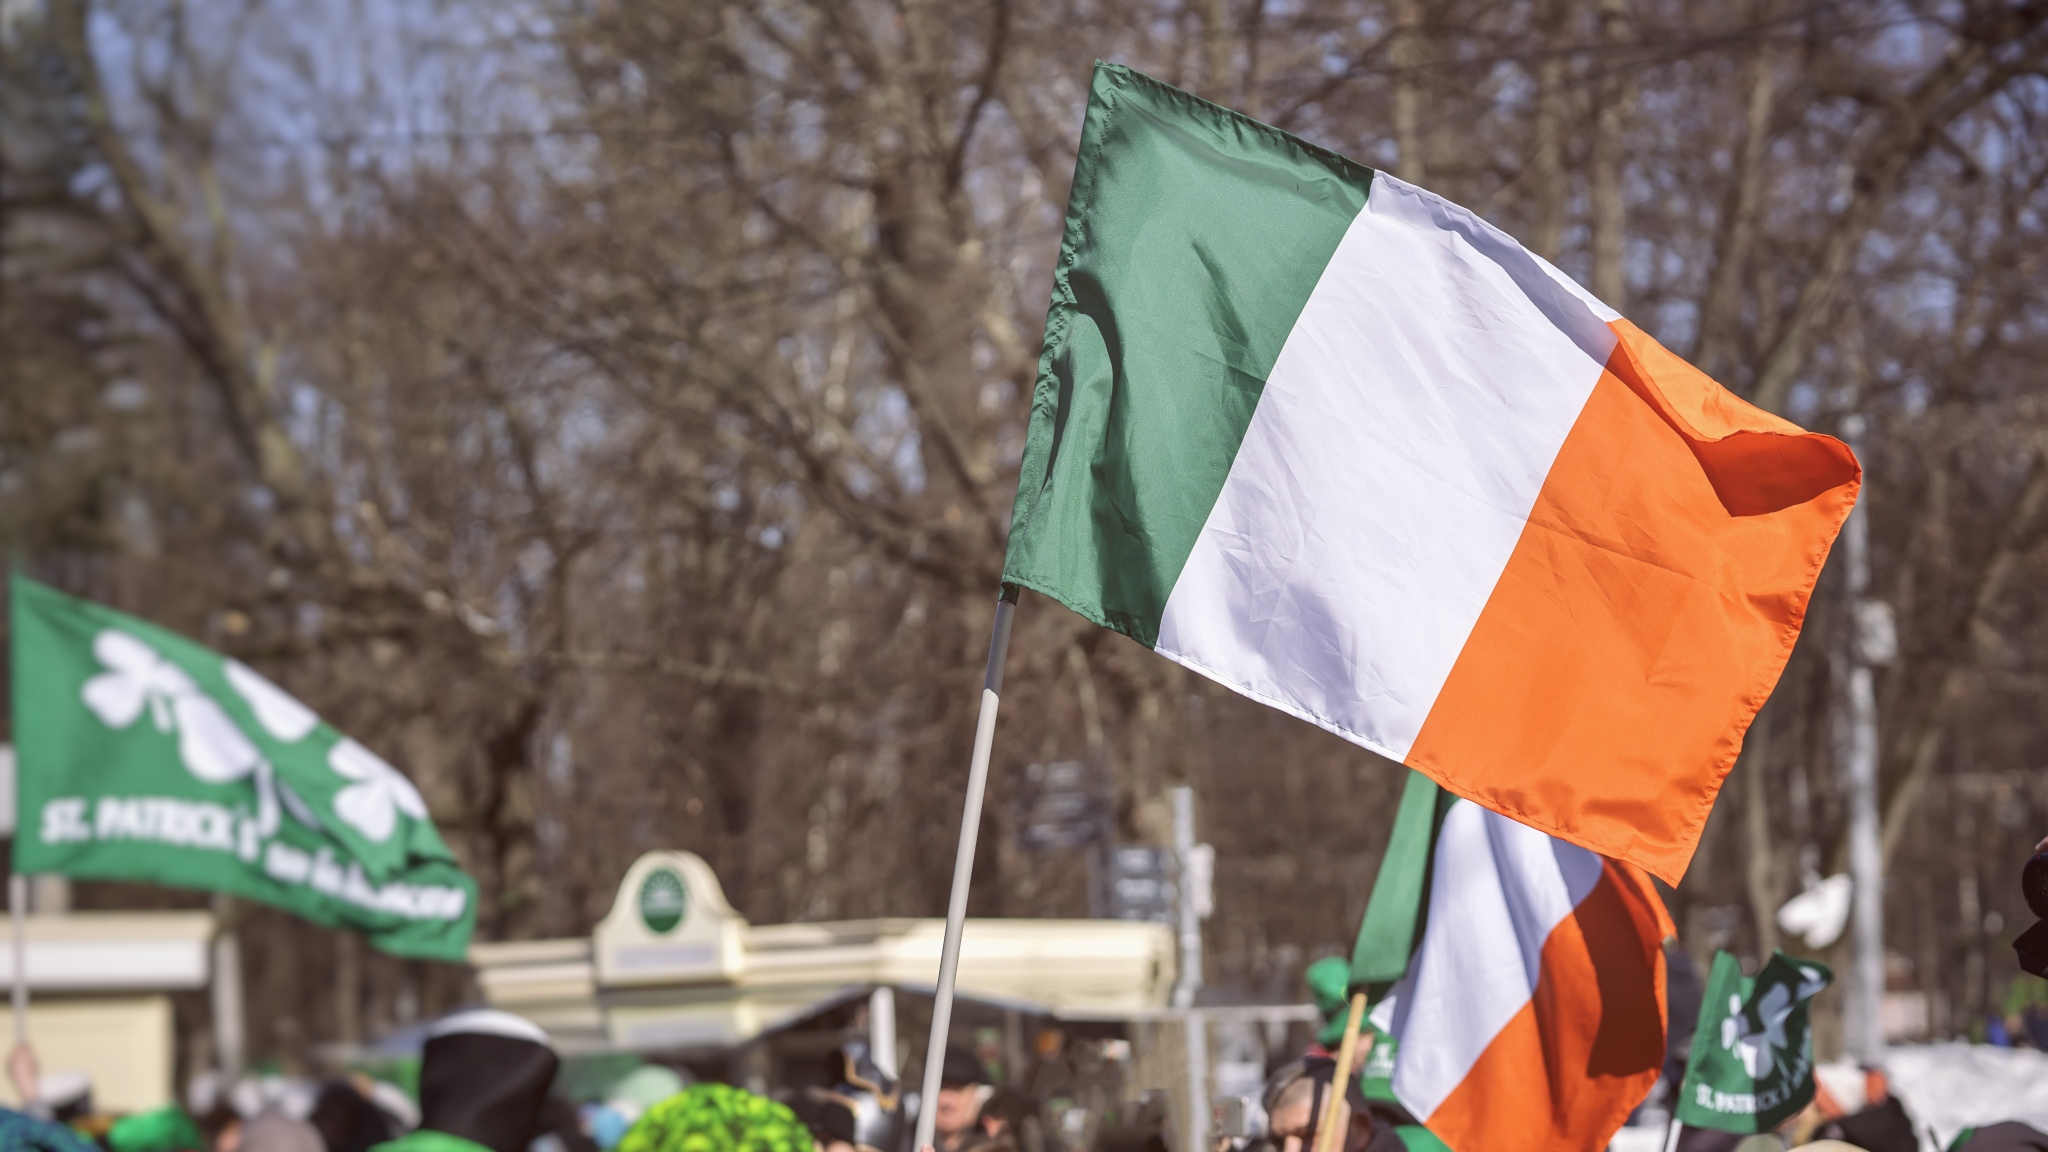 The Irish flag flying at a St. Patrick's day celebration. st. Patrick's Day is an ancient Celtic holiday still celebrated today.